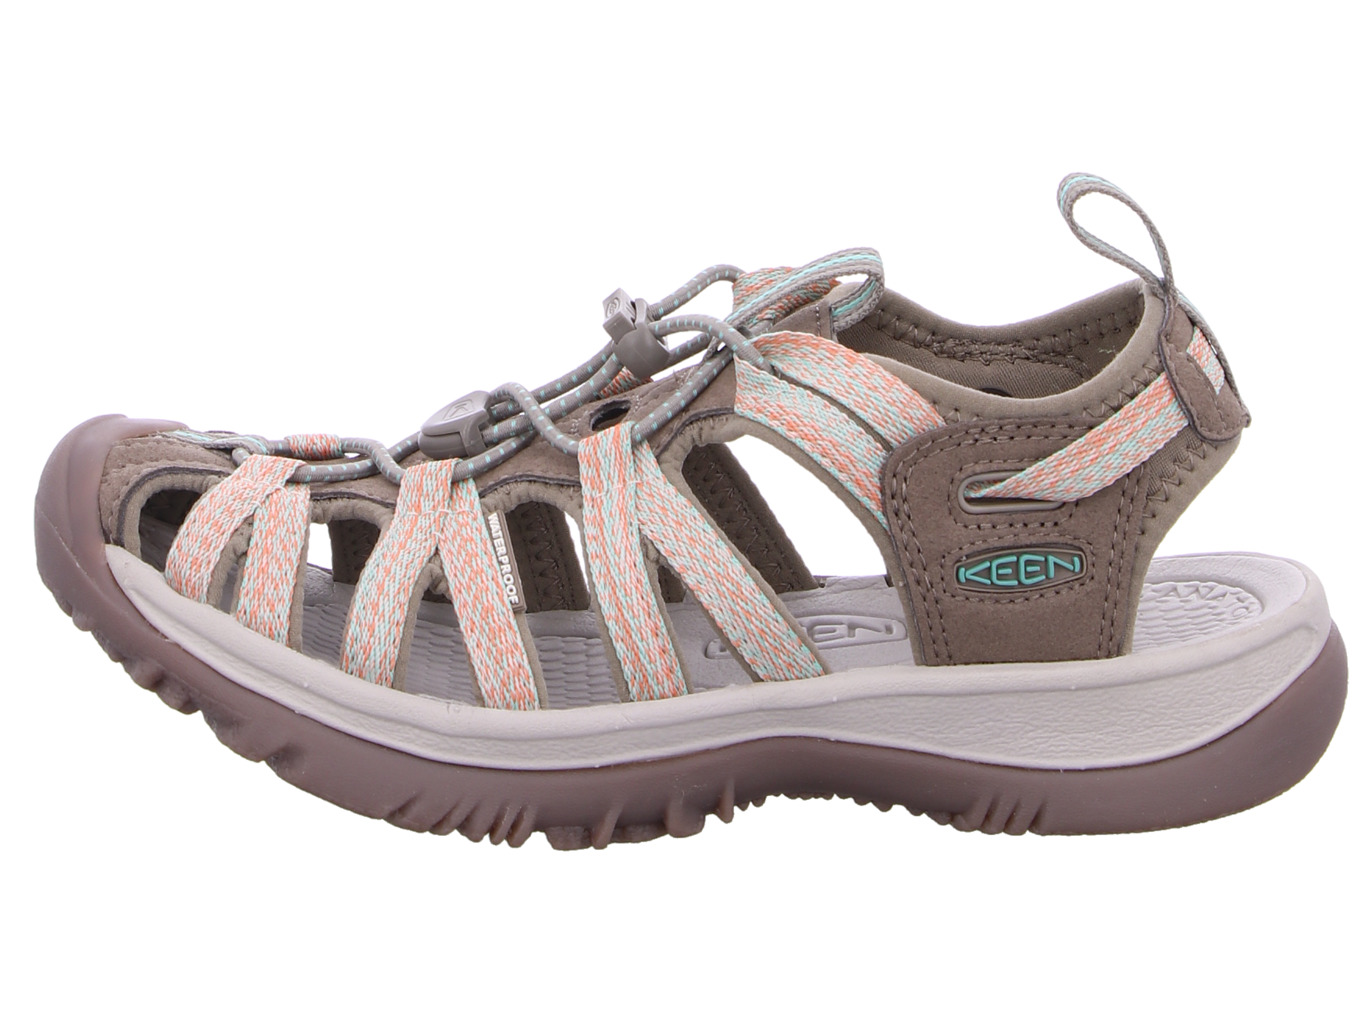 keen_whisper_taupe_coral_1022810_102281_3252